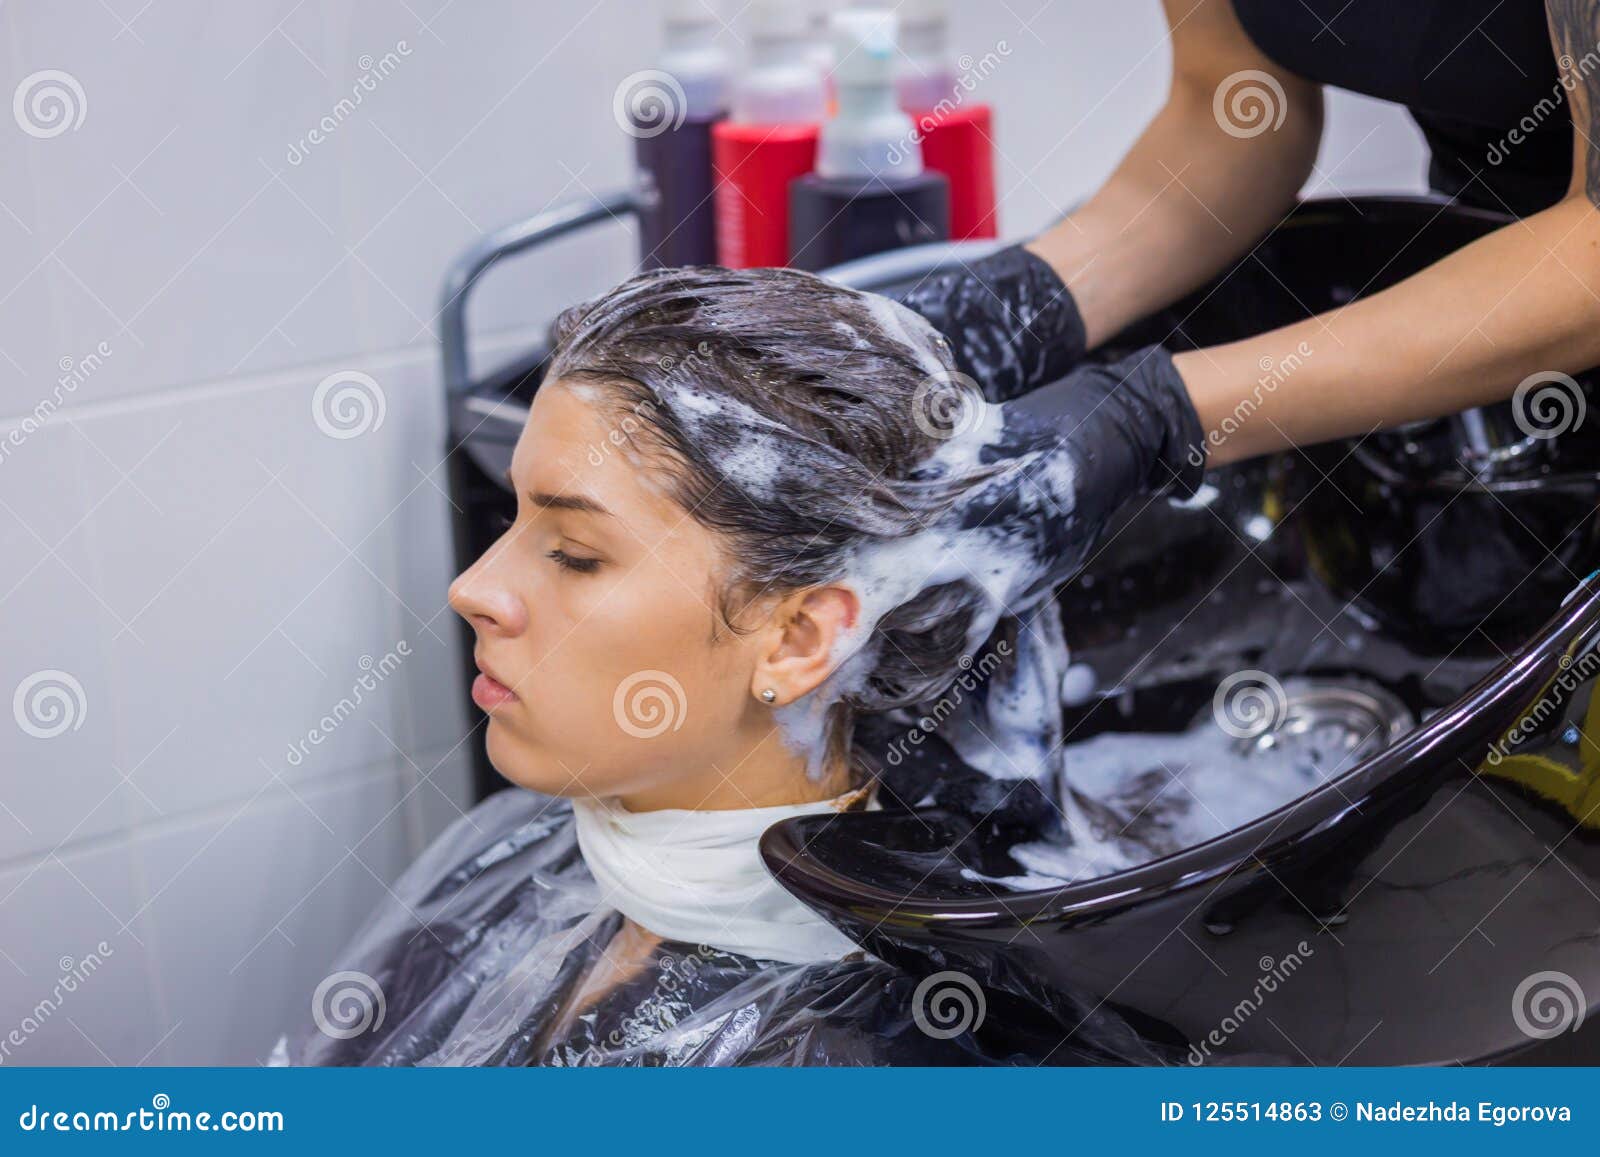 Hairdresser Washing Hair of Woman Client Stock Image - Image of barbershop,  occupation: 125514863